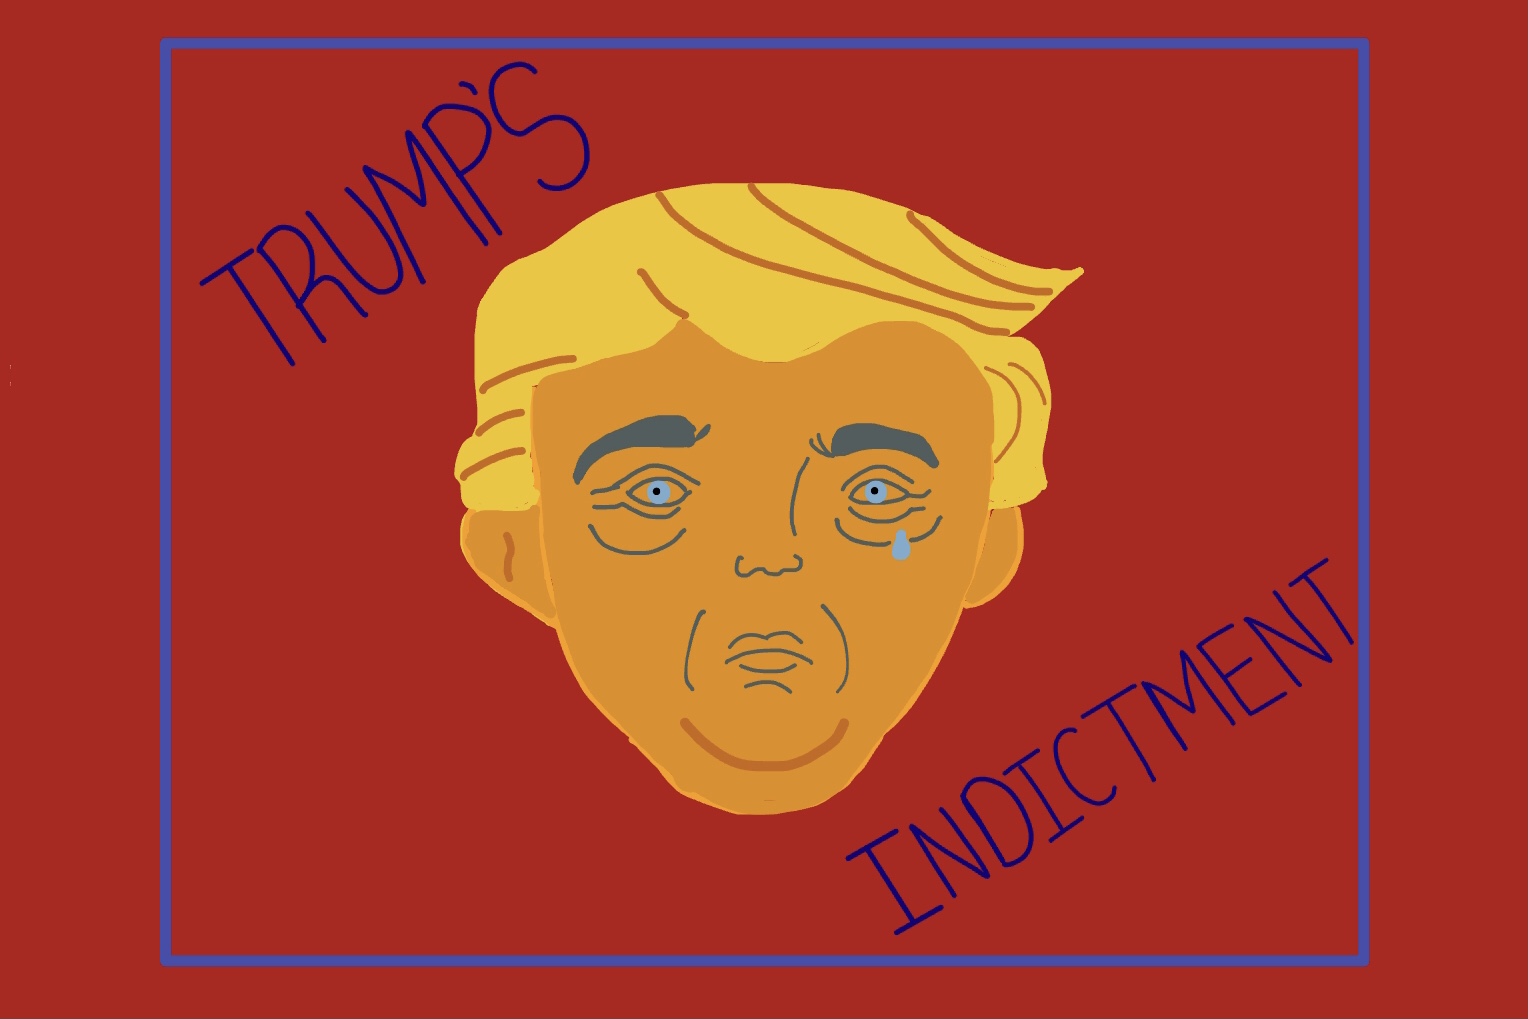 On Tuesday, April 4, 2023, Donald Trump became the first former U.S. president to be indicted. (Graphic by Kashaf Iftikhar)